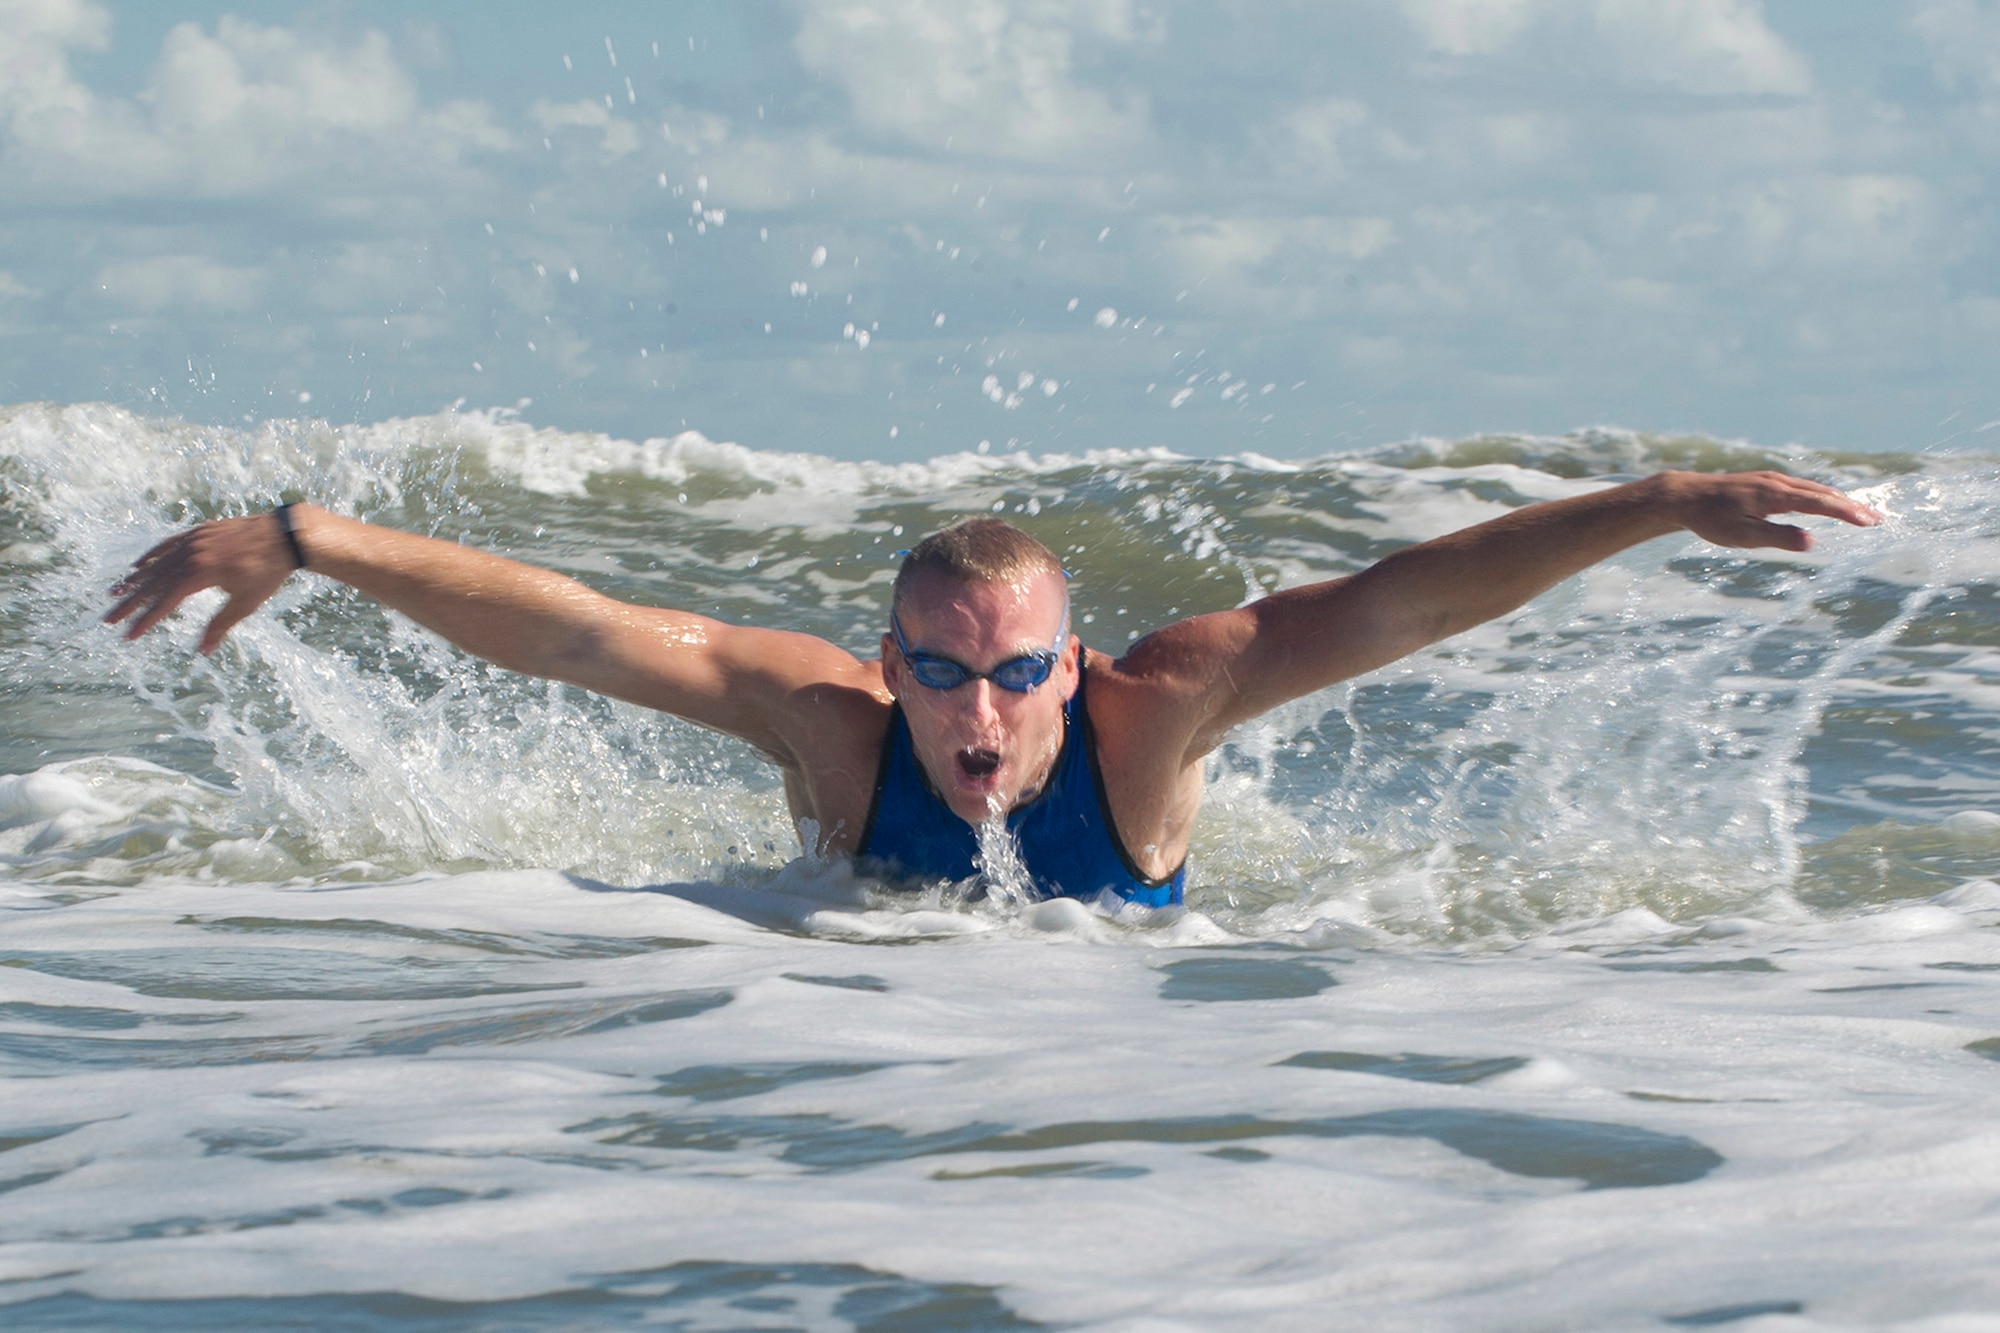 First Lt. Carl Eichert, a special nuclear events analyst for the Air Force Technical Applications Center, Patrick AFB, Fla., comes up for air while swimming in the Atlantic Ocean off Florida’s Space Coast as he trains for the 2018 Ironman World Competition in Hawaii. (U.S. Air Force photo by Phillip C. Sunkel IV)